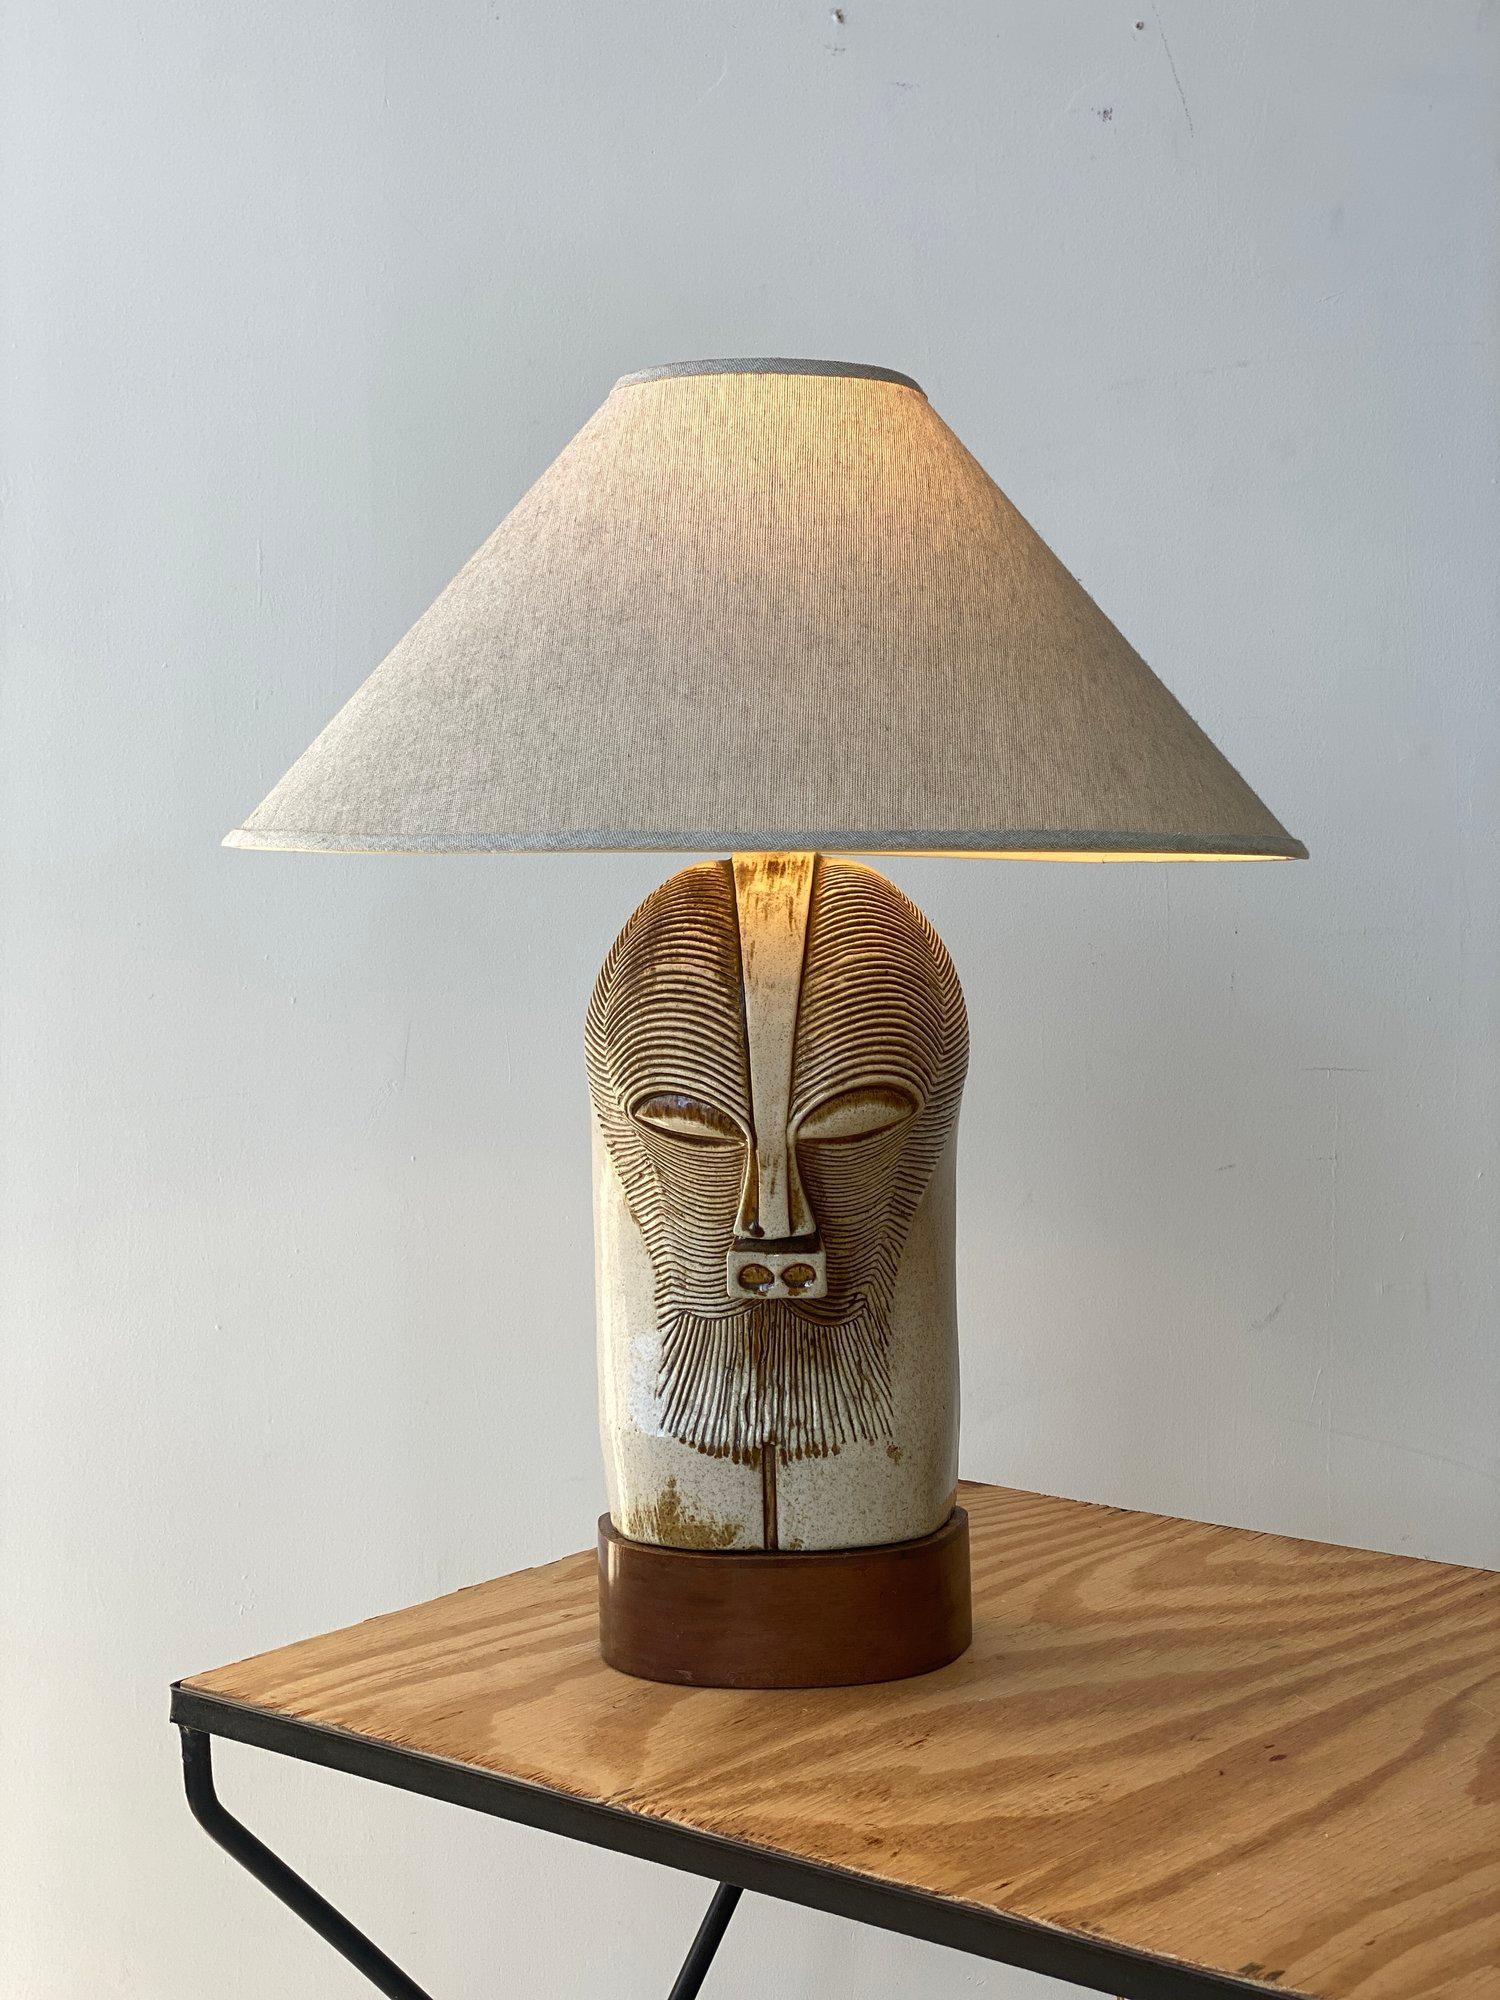 Vintage Large Scale Ceramic Kifwebe-Inspired Mask Lamp on Mahogany Base, Circa 1950s. A gorgeous interpretation of a Congolese Kifwebe mask rendered in off-white stoneware with incised surface detailing in shades of tan and brown. Mounted on a solid